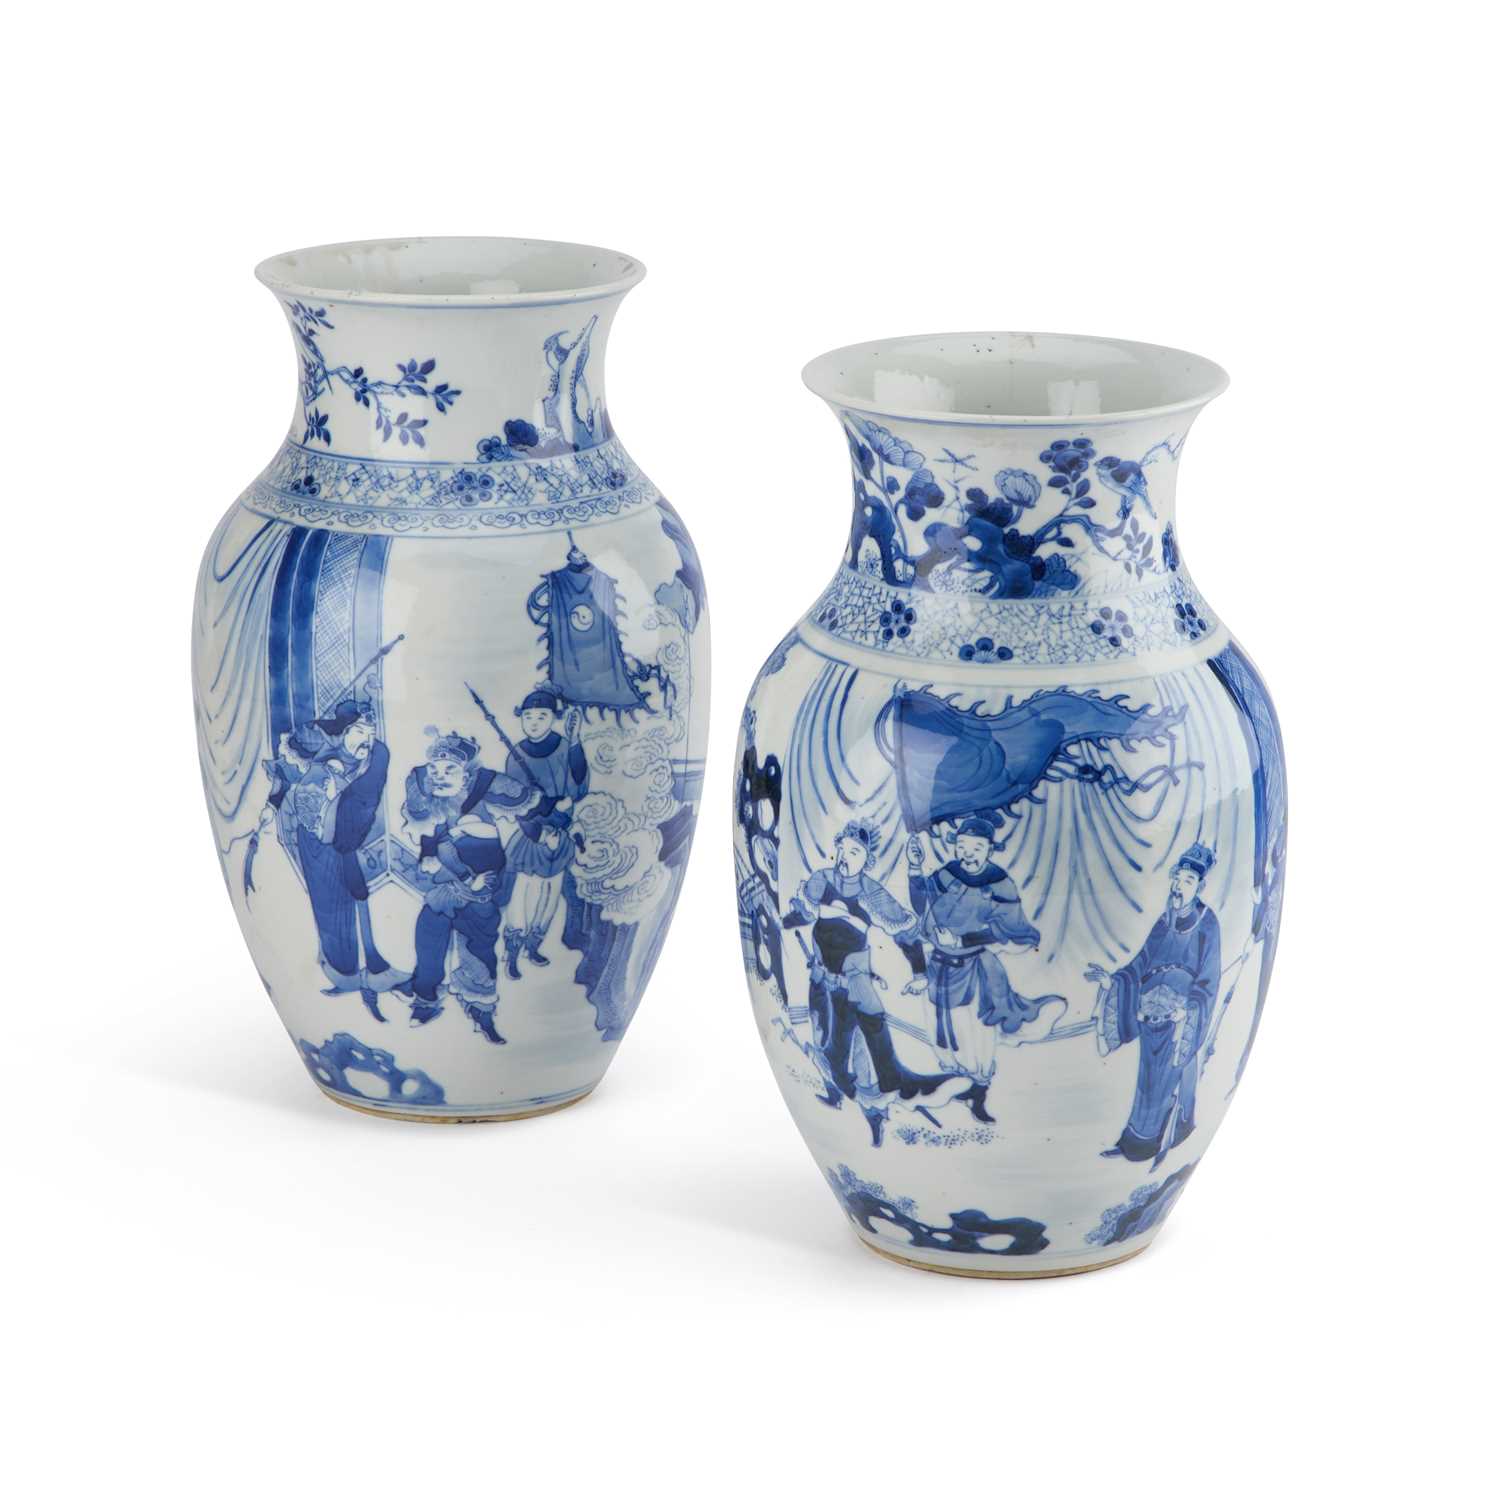 A NEAR PAIR OF 19TH CENTURY CHINESE BLUE AND WHITE VASES